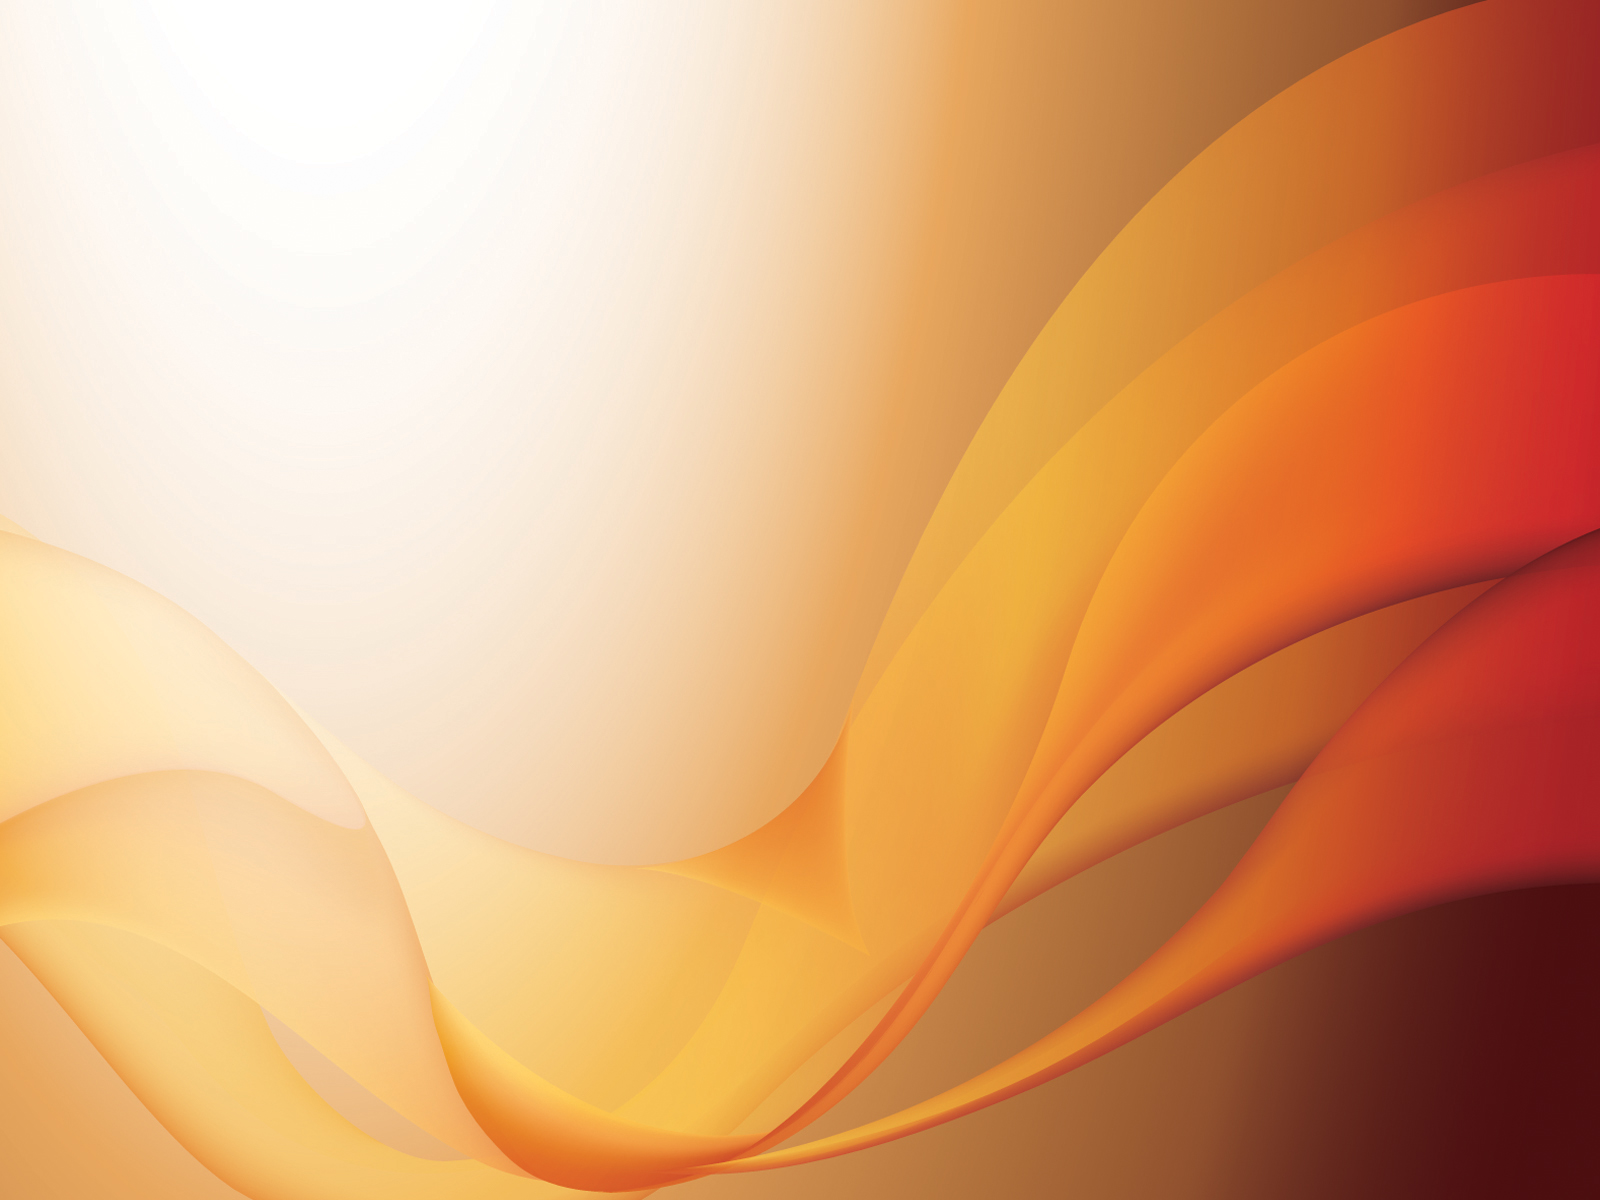 Orange Waves Powerpoint Templates - Abstract, Orange - Free PPT Backgrounds  and Templates